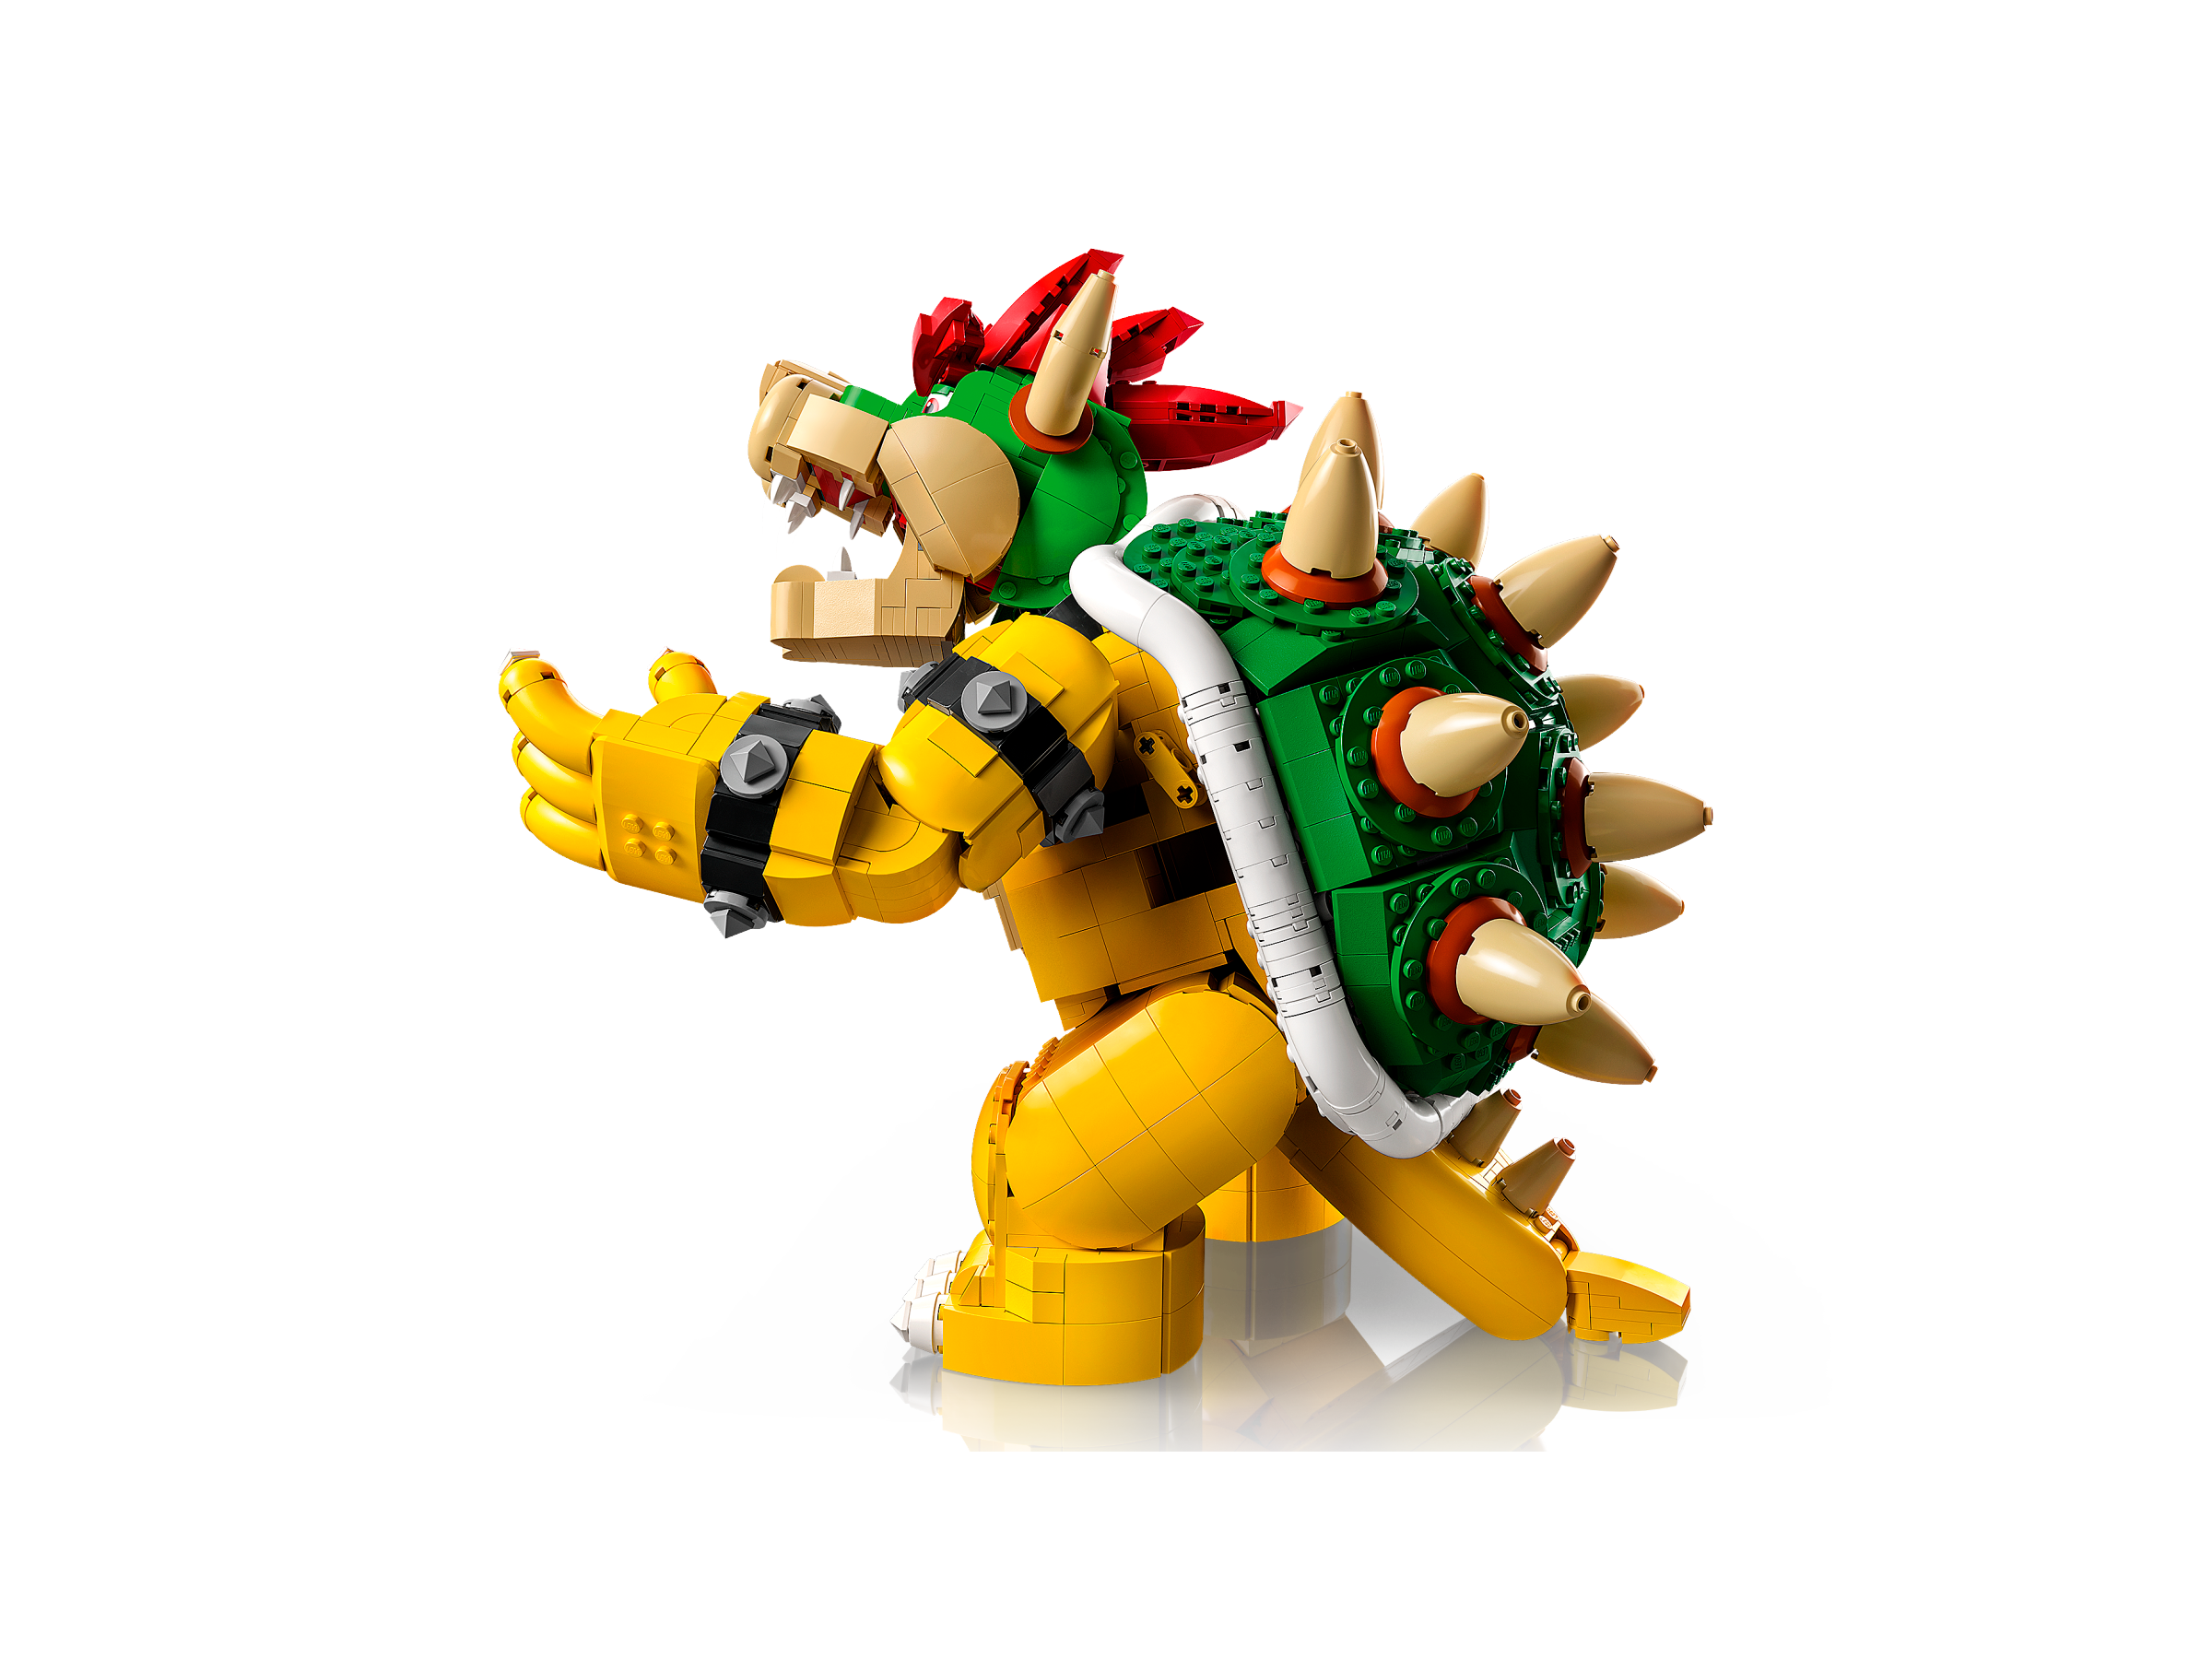 Forget the 2,800-piece set, we want the 663,900-piece LEGO Bowser